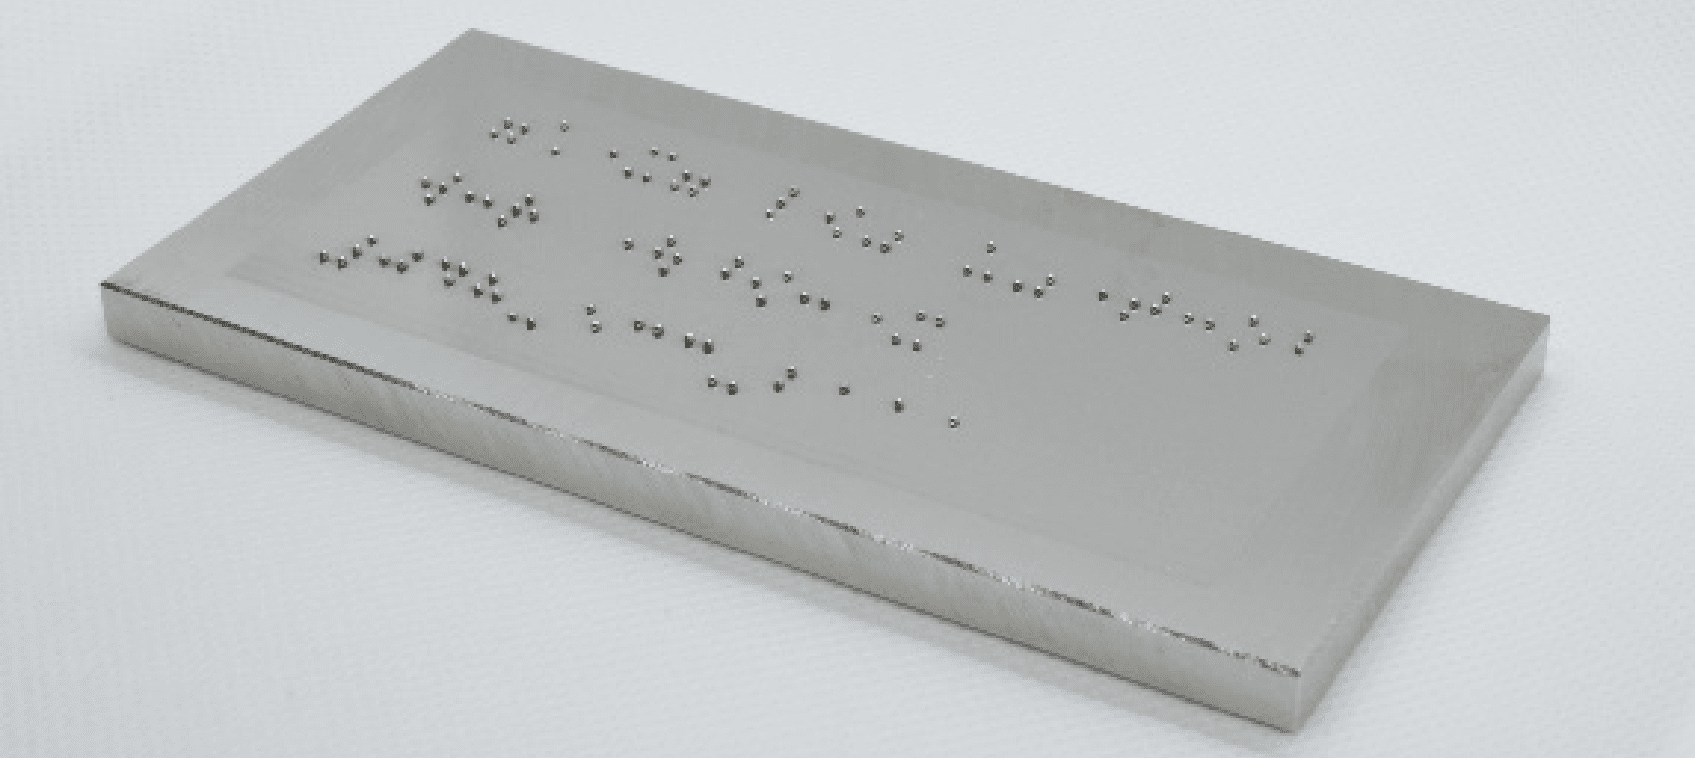 Metal Braille dot characters that are resistant to deterioration over time